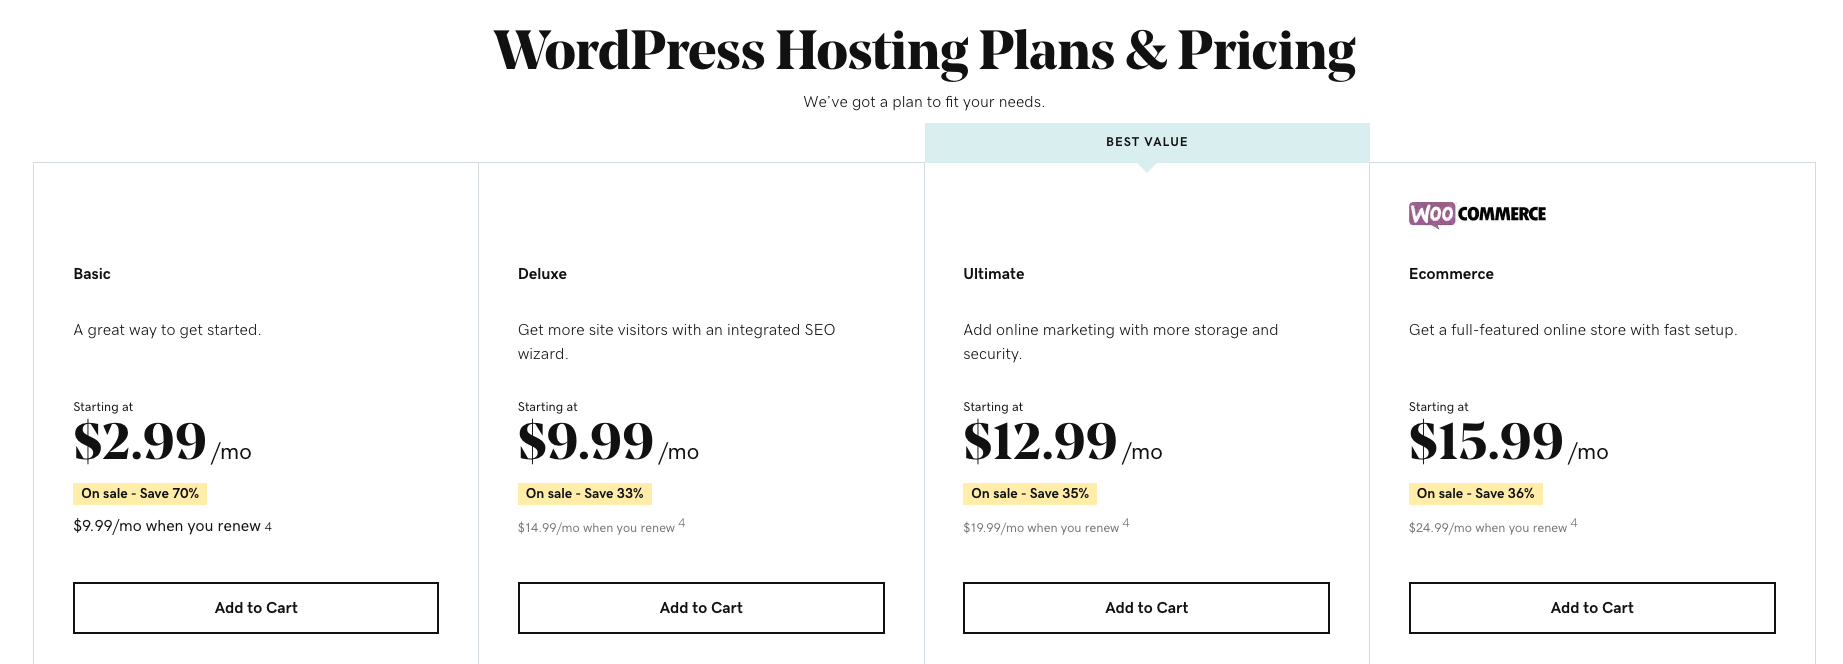 GoDaddy Hosting Prices Compared (Screenshot of Chart)